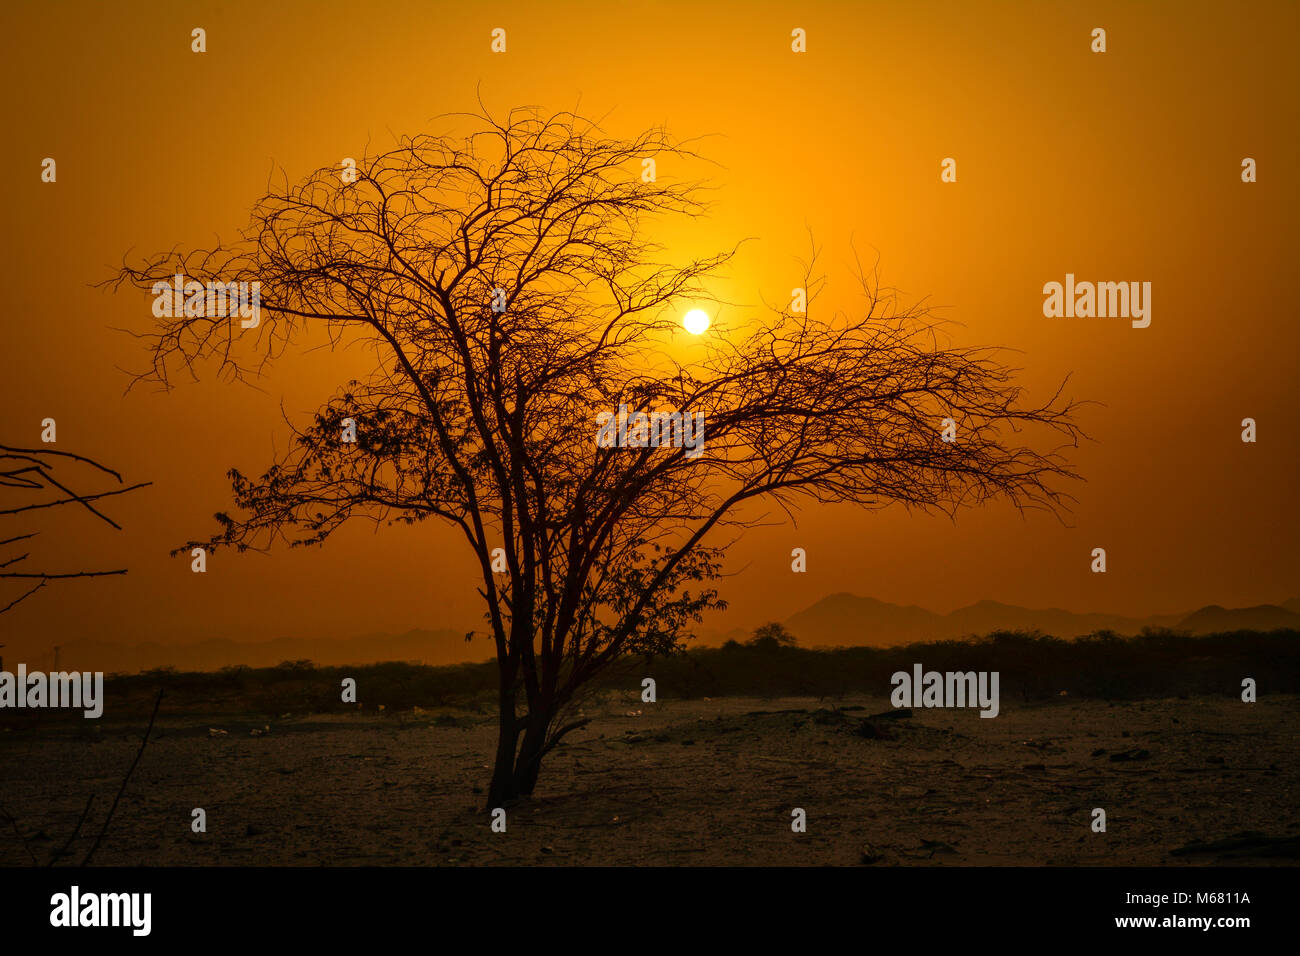 Sunset and silhouette tree Stock Photo